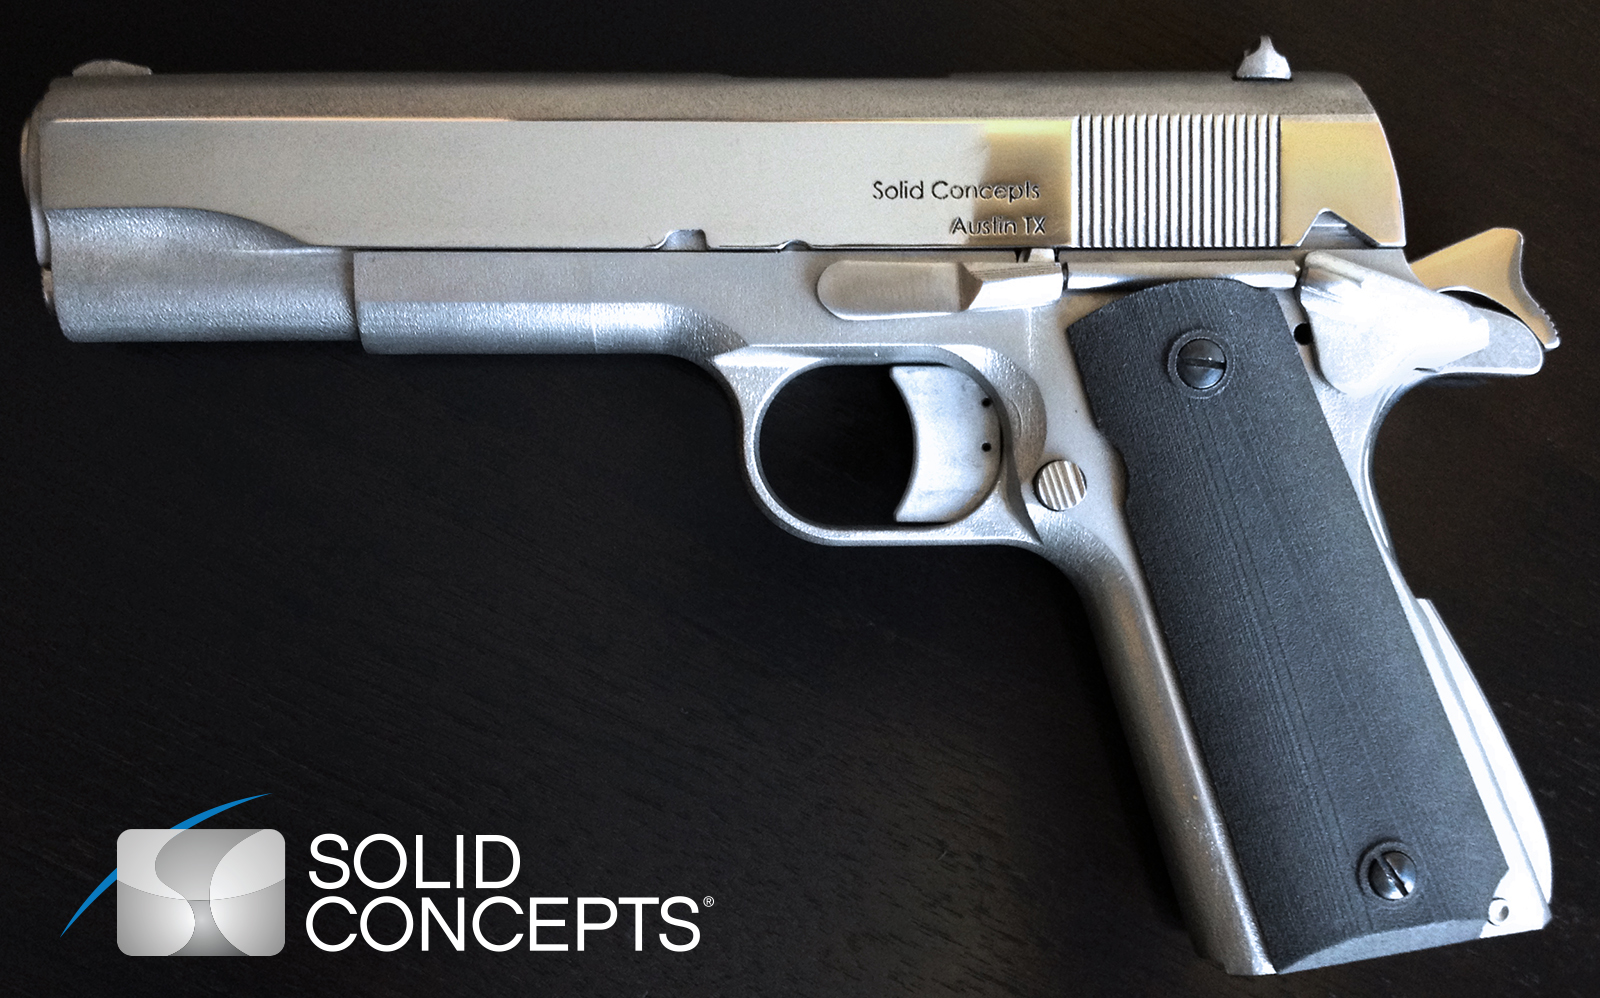 This 1911 pistol was built using 3D printing. Courtesy of Solid Concepts.